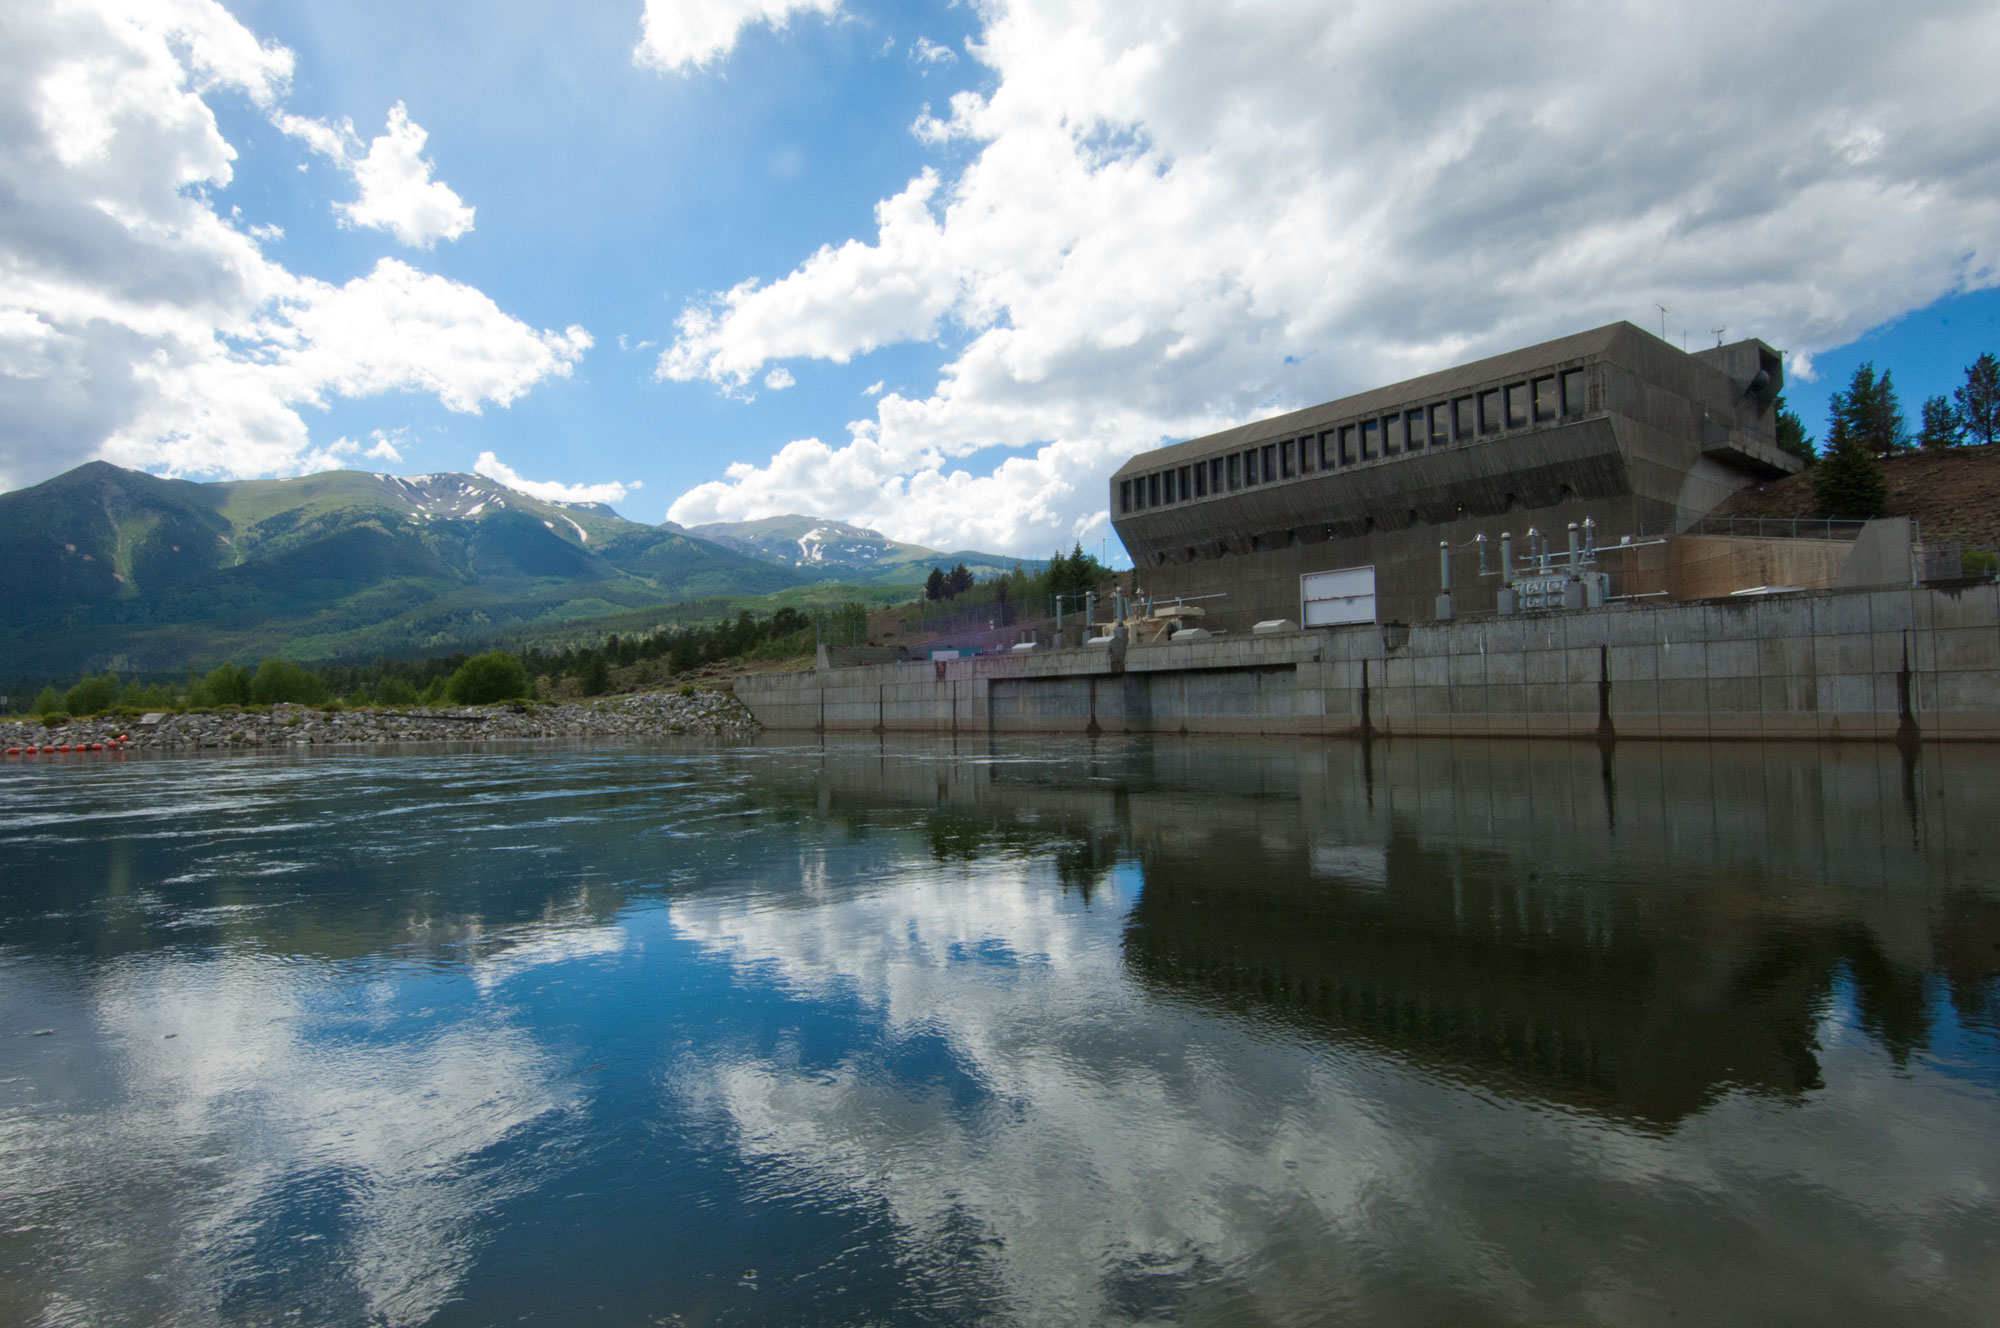 Photograph of a lake with a pumping station next to it. The pumping station is a concrete building with a bank of windows facing the lake. Some equipment sits in the front of the building. Mountain peaks rise in the background.